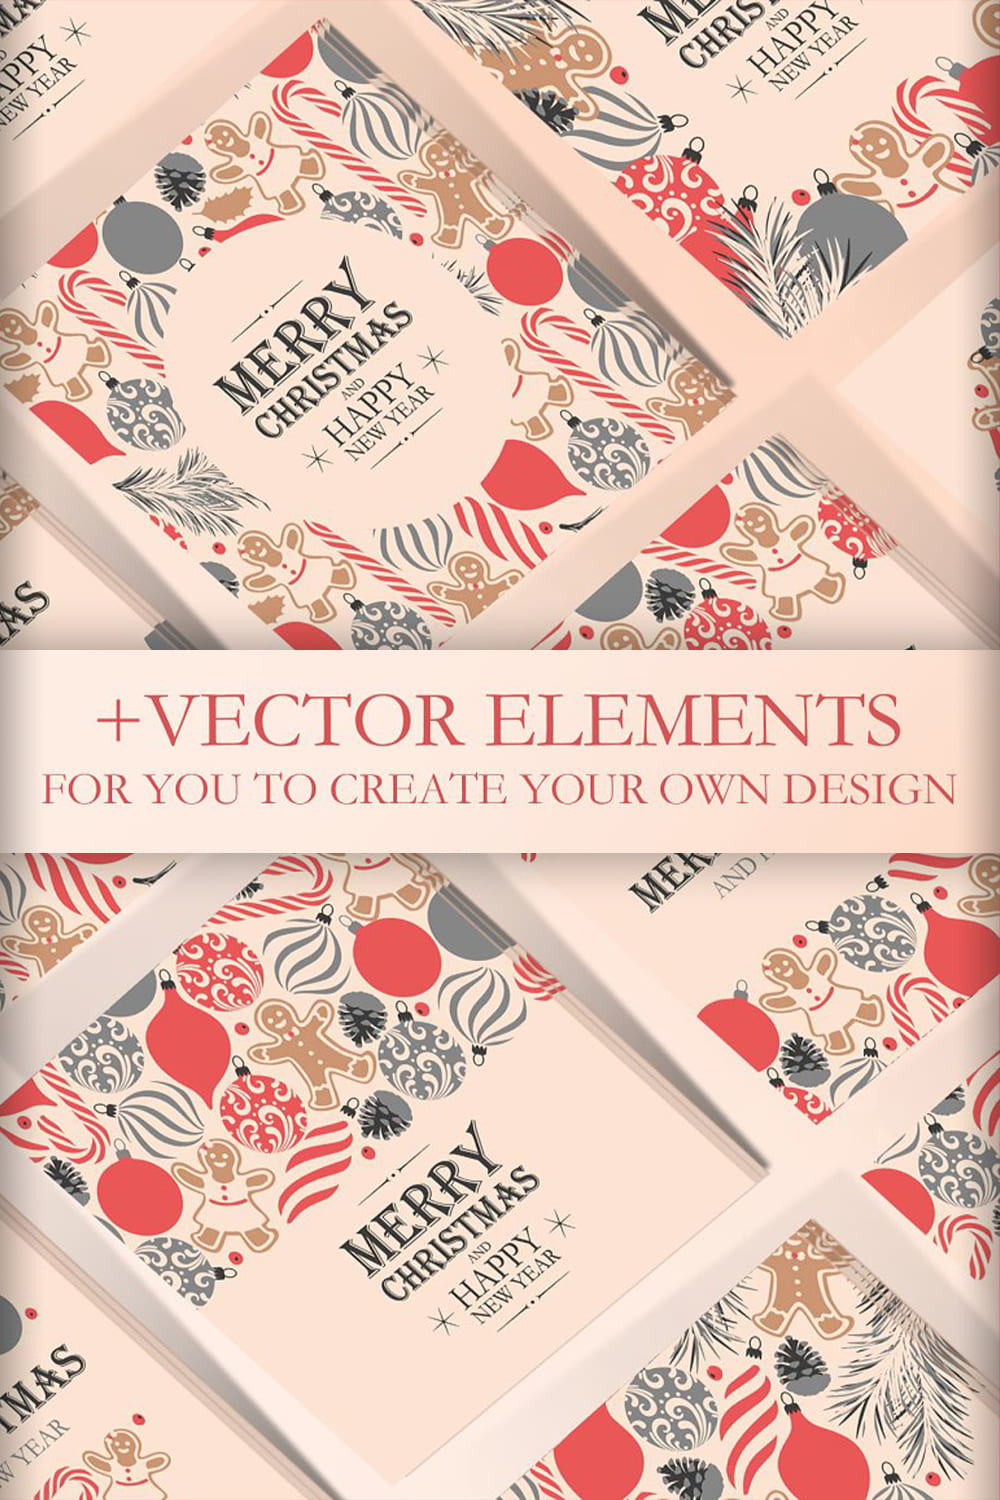 Vector elements for you to create your own design.